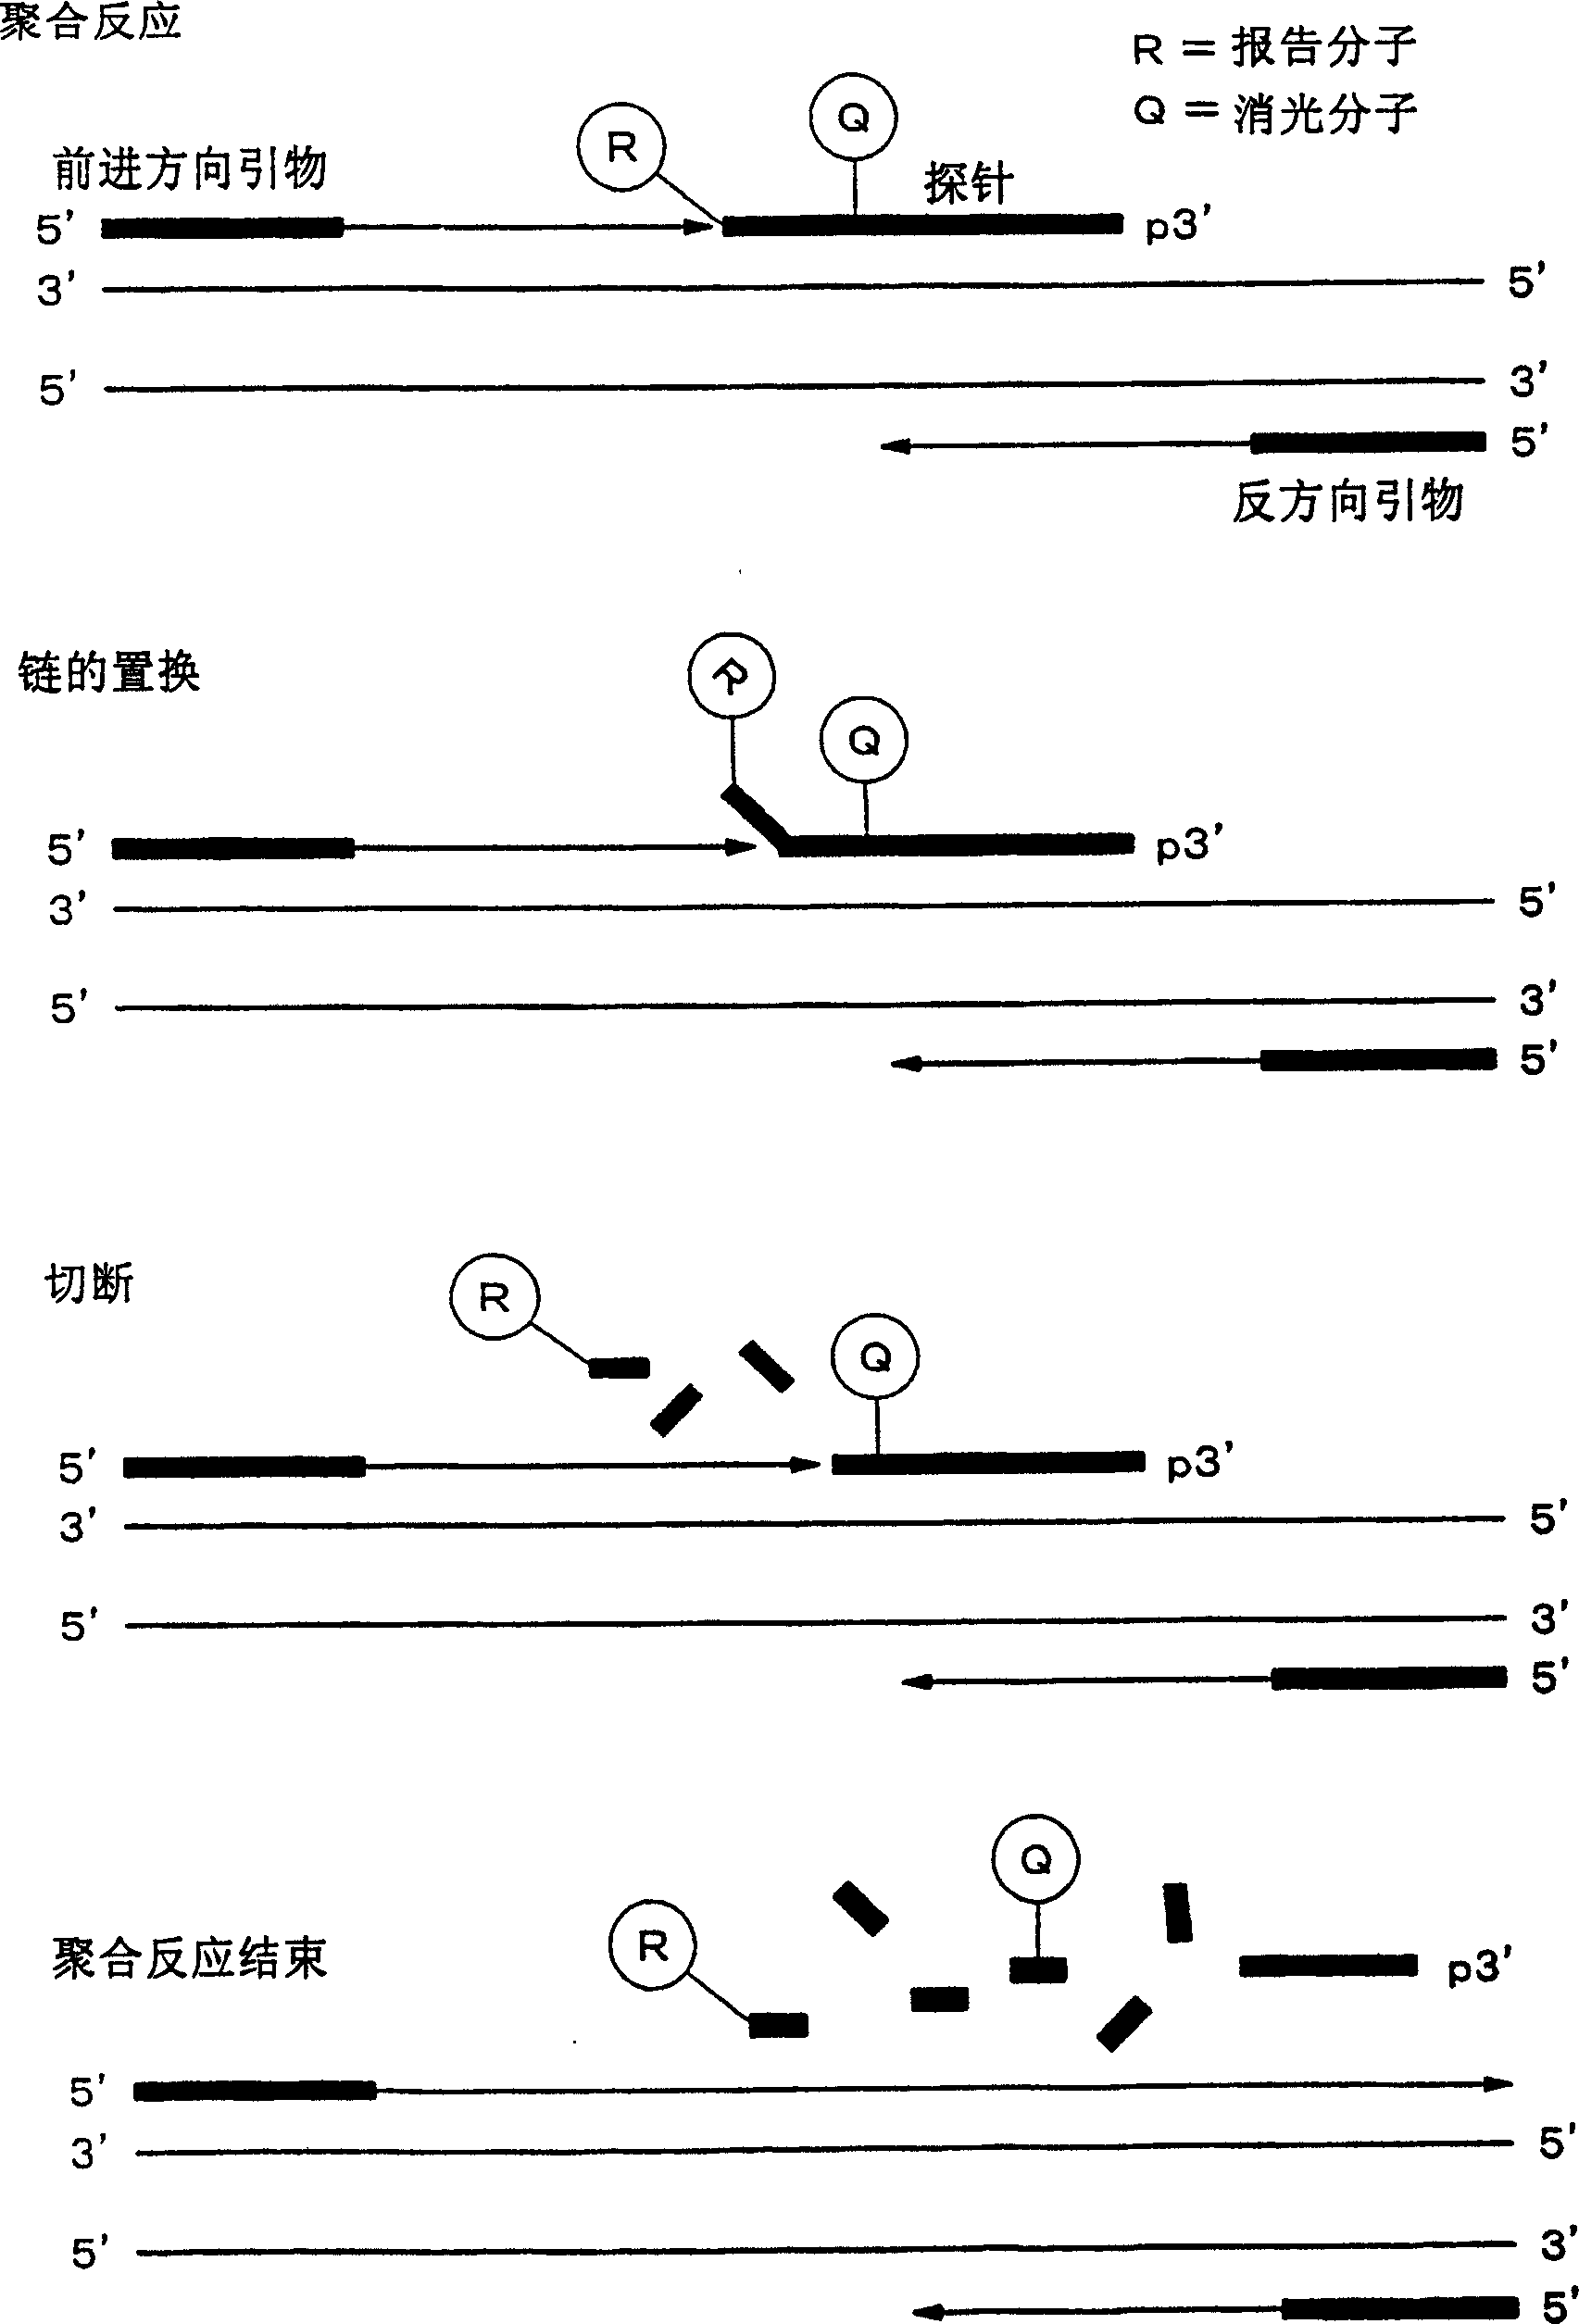 Method of detecting inorganic phosphoric acid, pyrophosphate and nucleic acid, and method of typing snp sequence of DNA